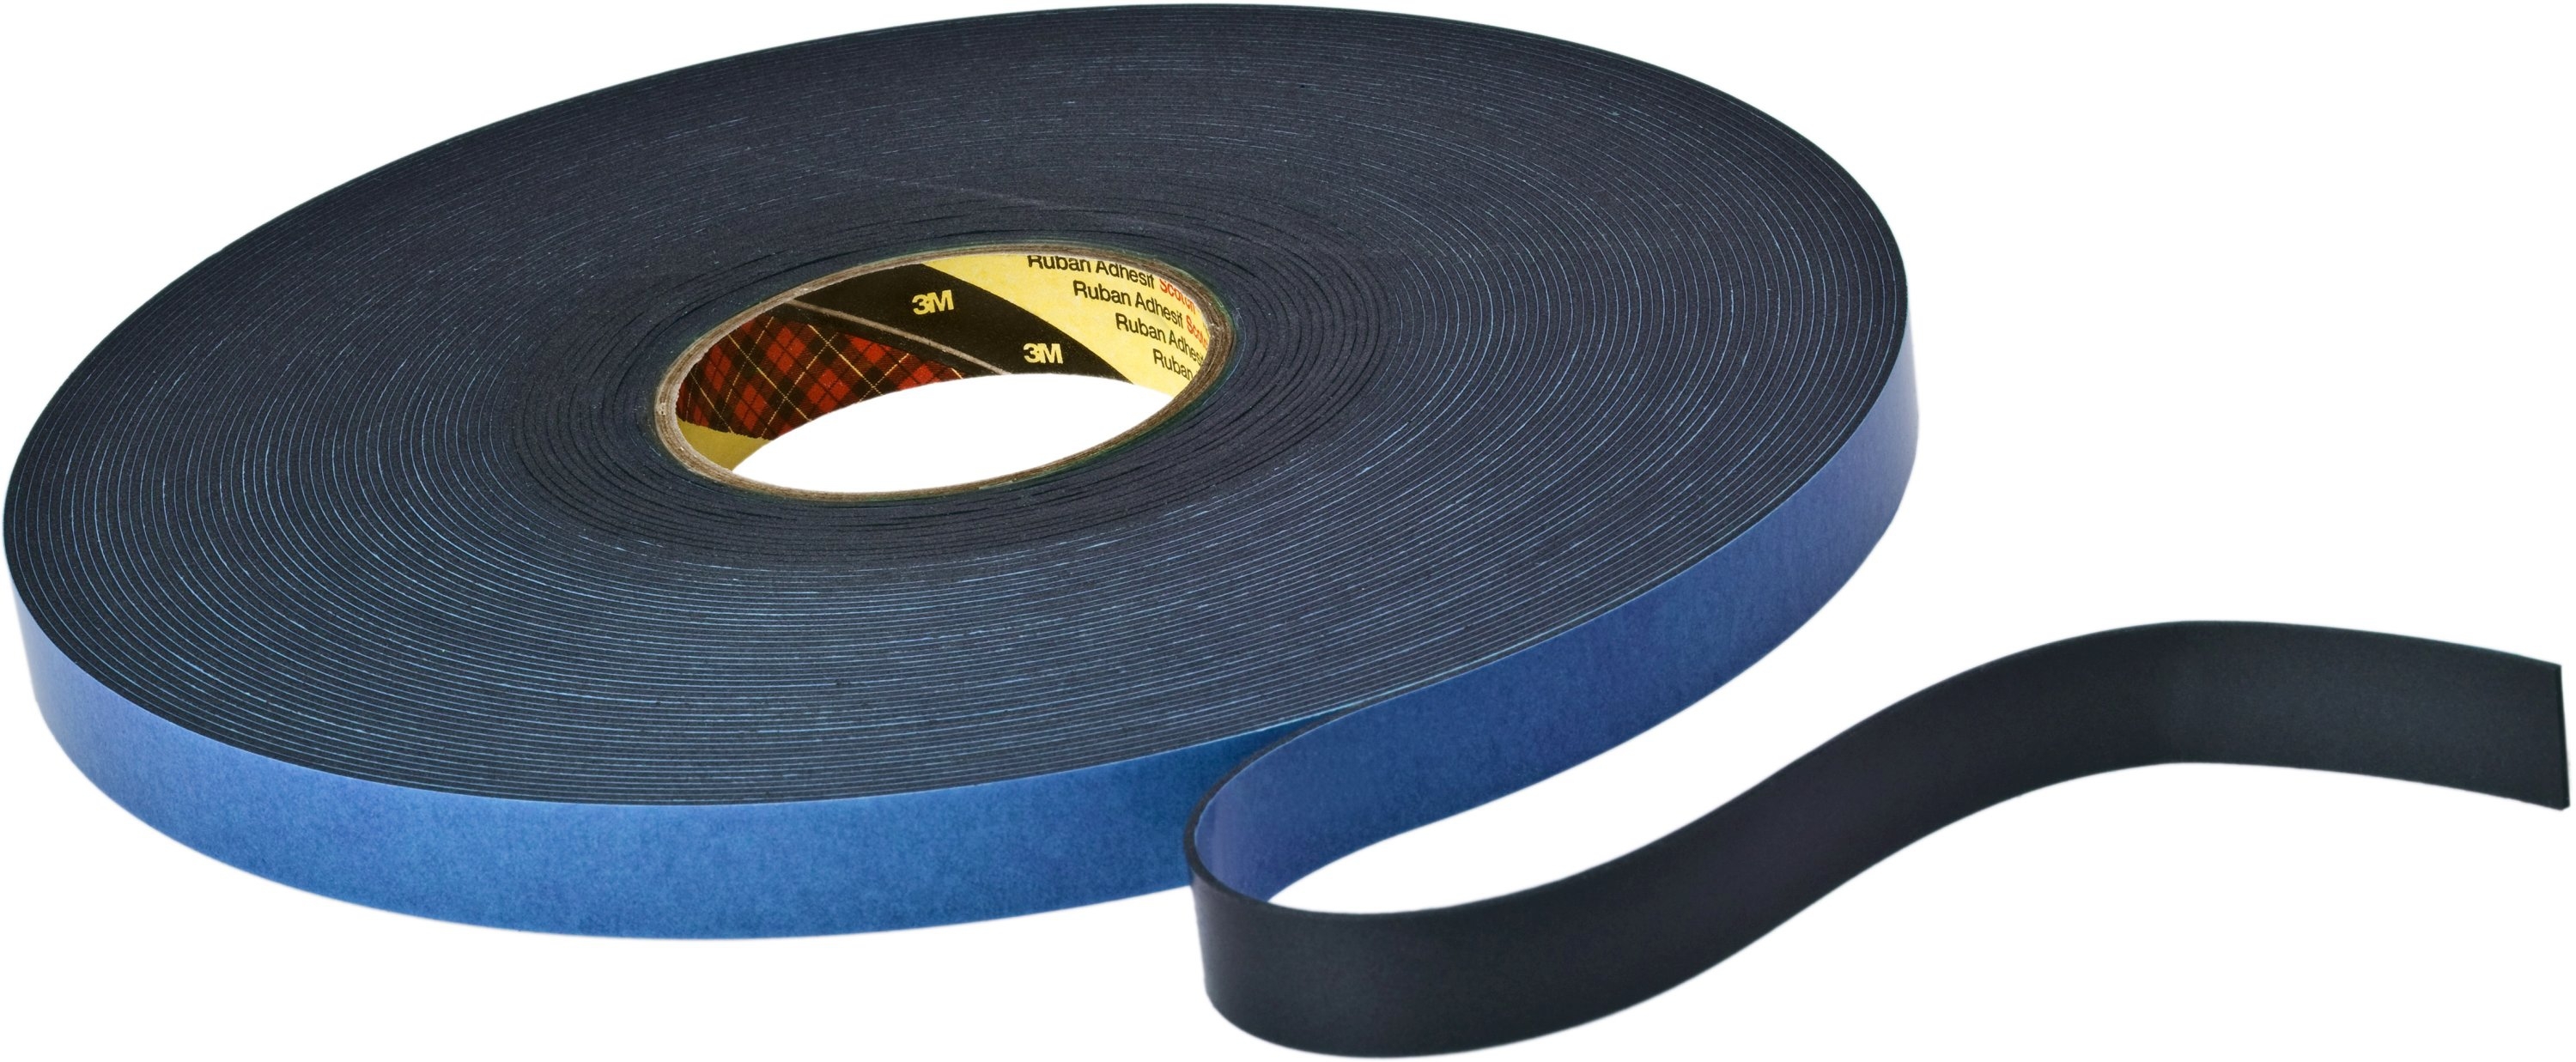 3M Double-sided PE foam tape with acrylic adhesive 9508B, black, 9 mm x 66 m, 0.8 mm